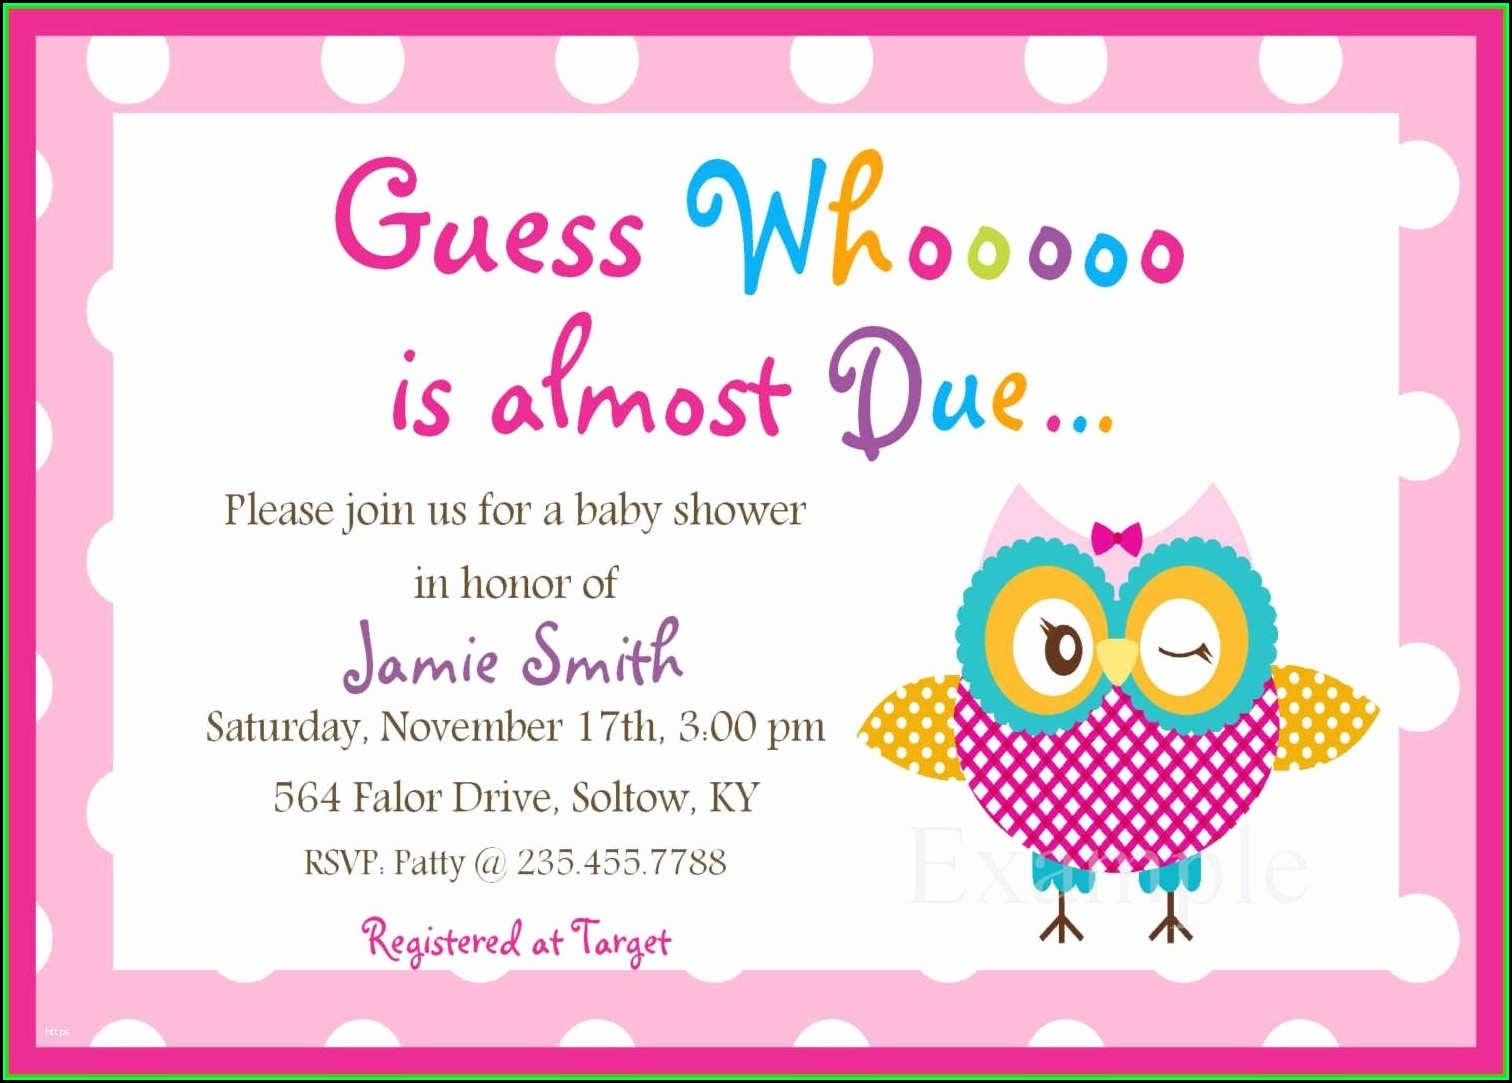 Baby Shower Invitation Card Template Free Download